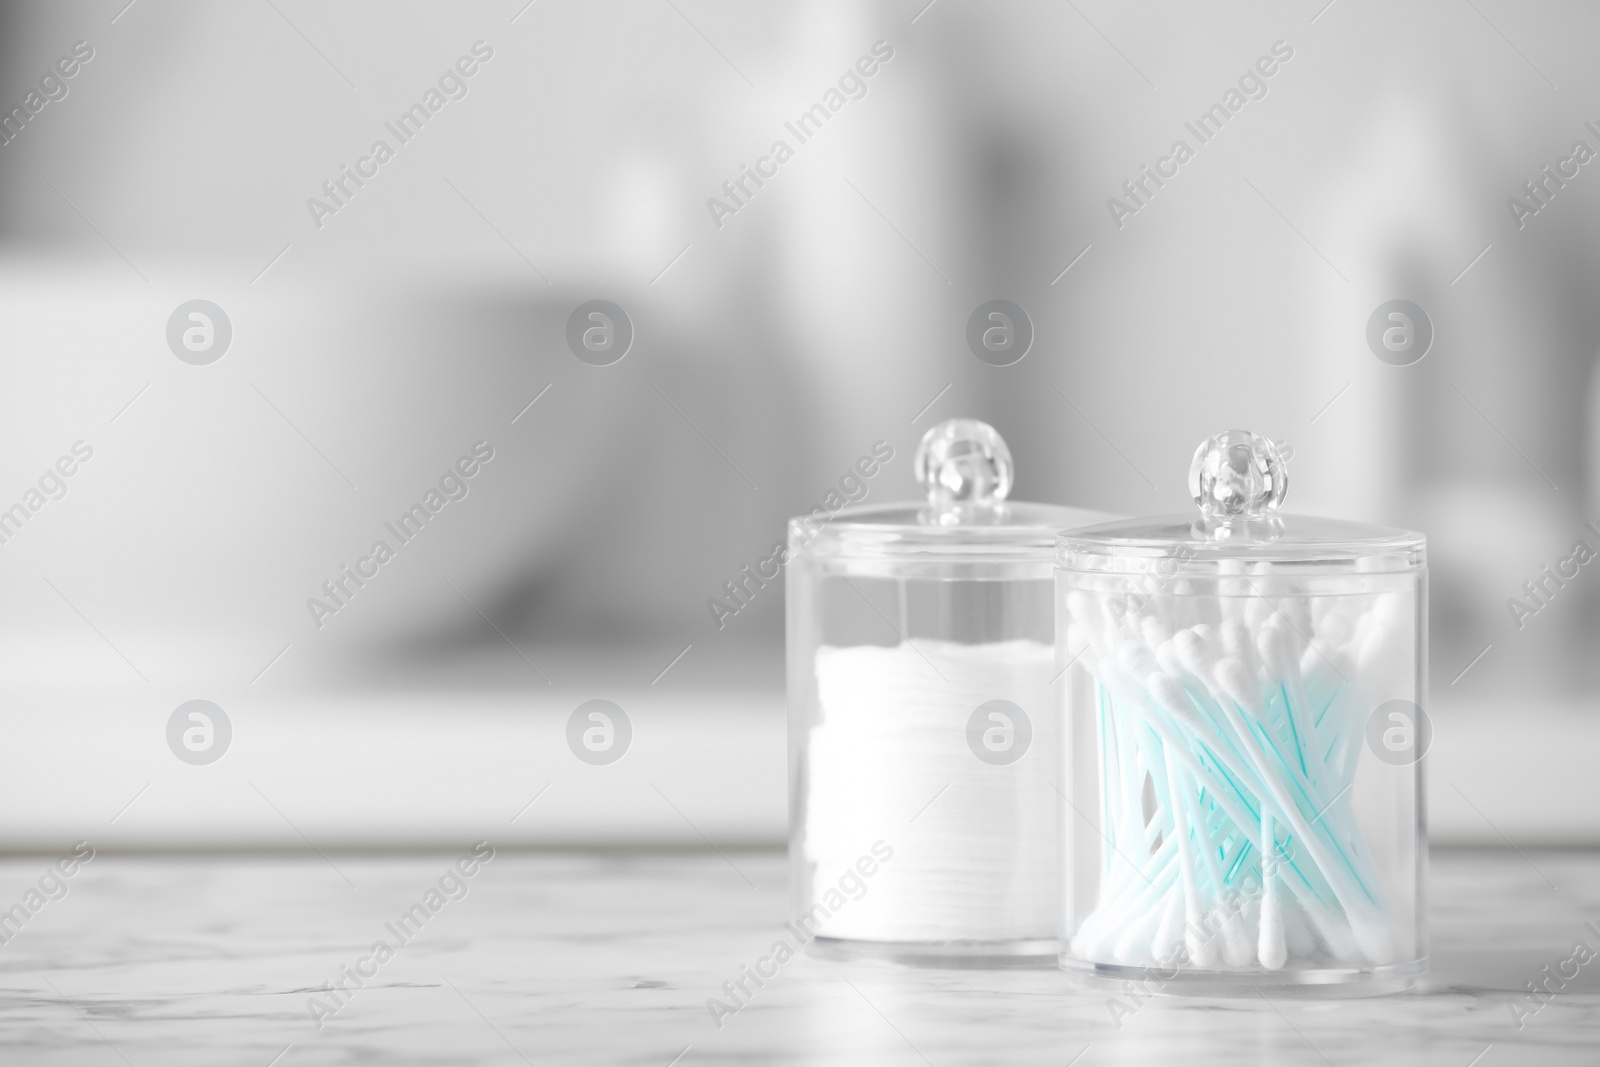 Photo of Plastic jars with cotton pads and swabs on white countertop in bathroom. Space for text